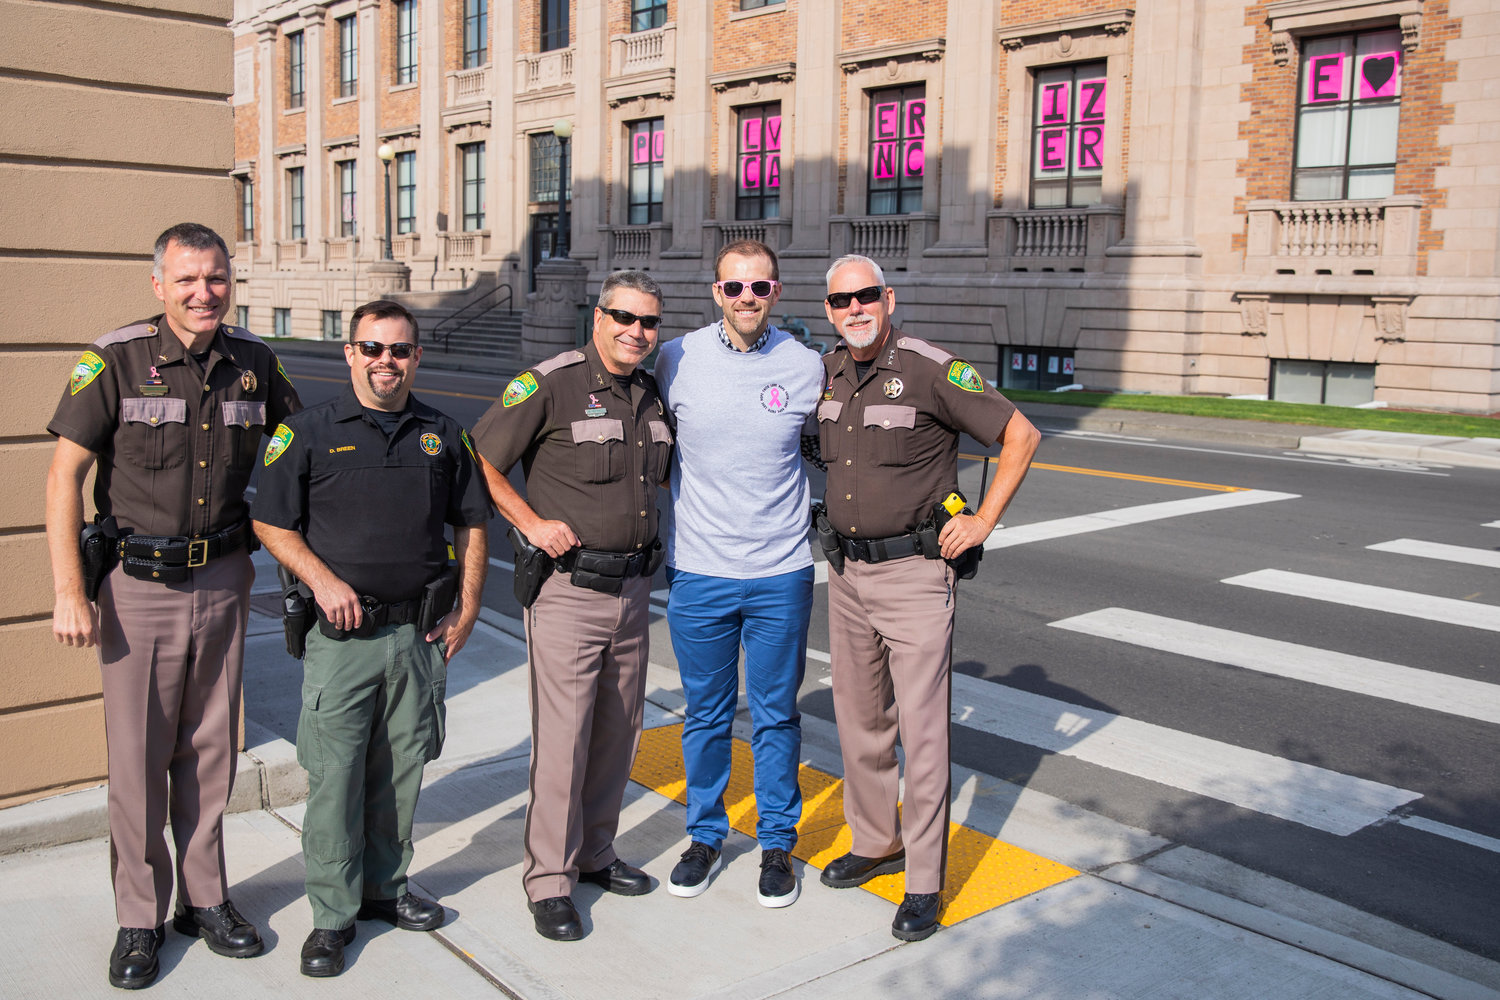 Commissioner Sean Swope smiles and poses for a photo alongside members of the Lewis County Sheriff’s Office in Chehalis on Friday during a walk for Breast Cancer Awareness Month.